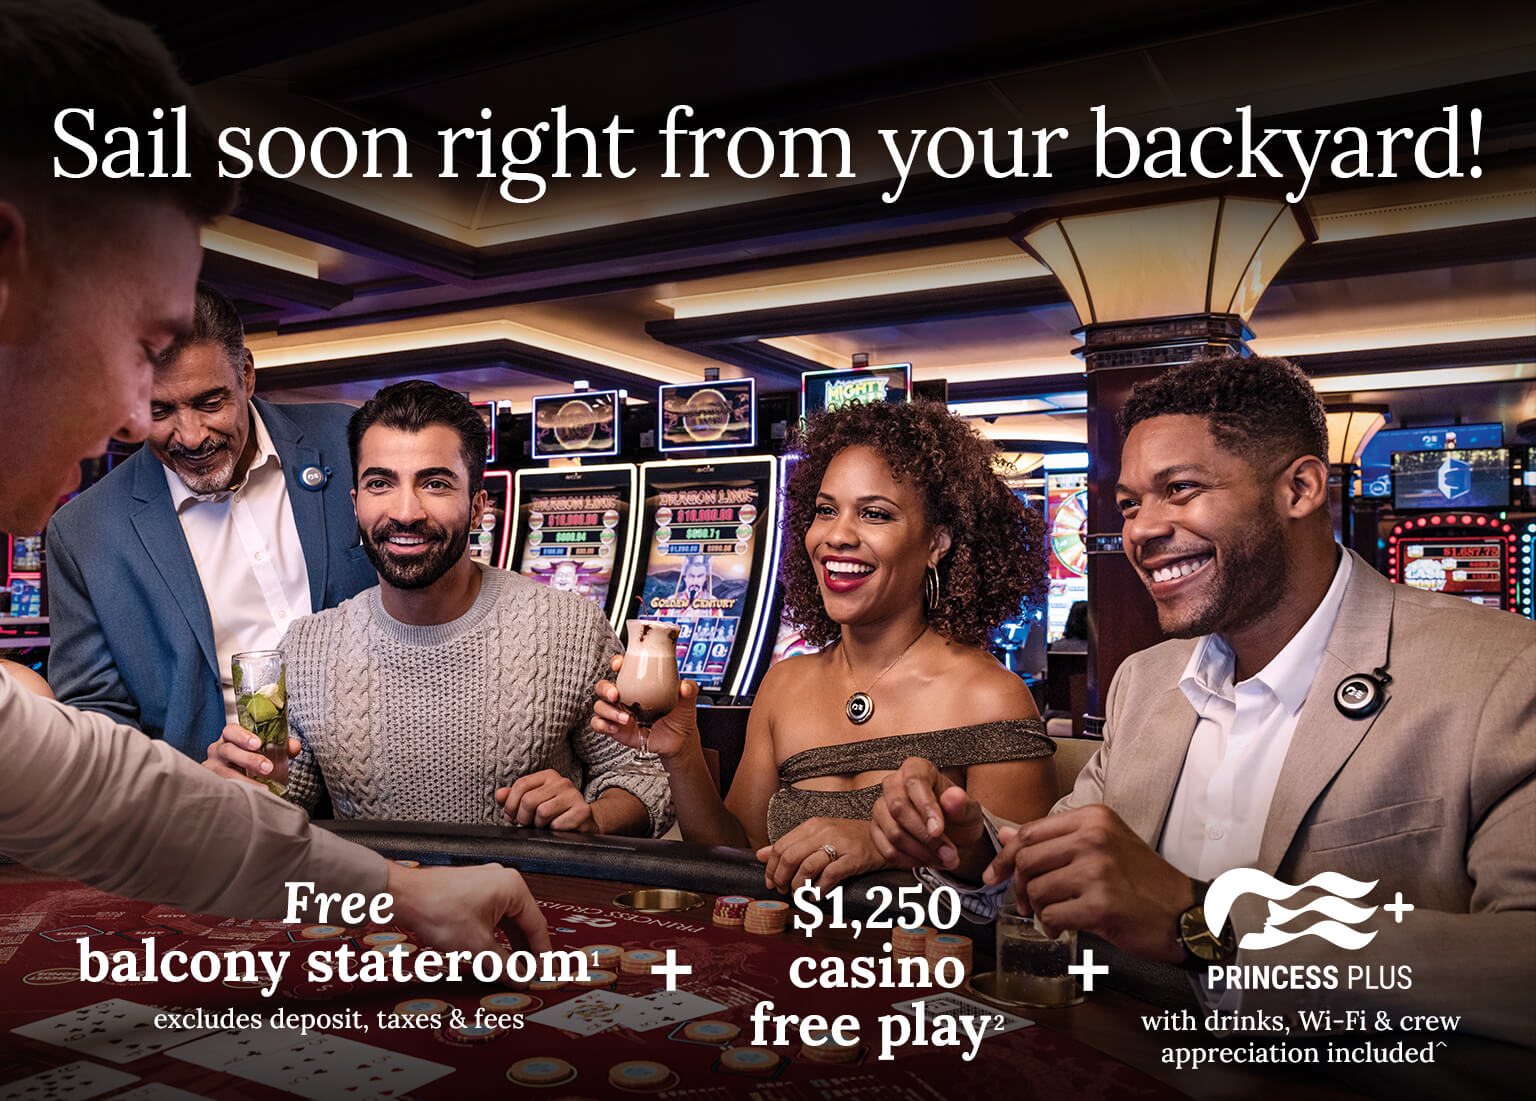 Enjoy a free balcony stateroom + $1,250 casino free play + drinks, wi-fi & crew appreciation included. Click here to book.